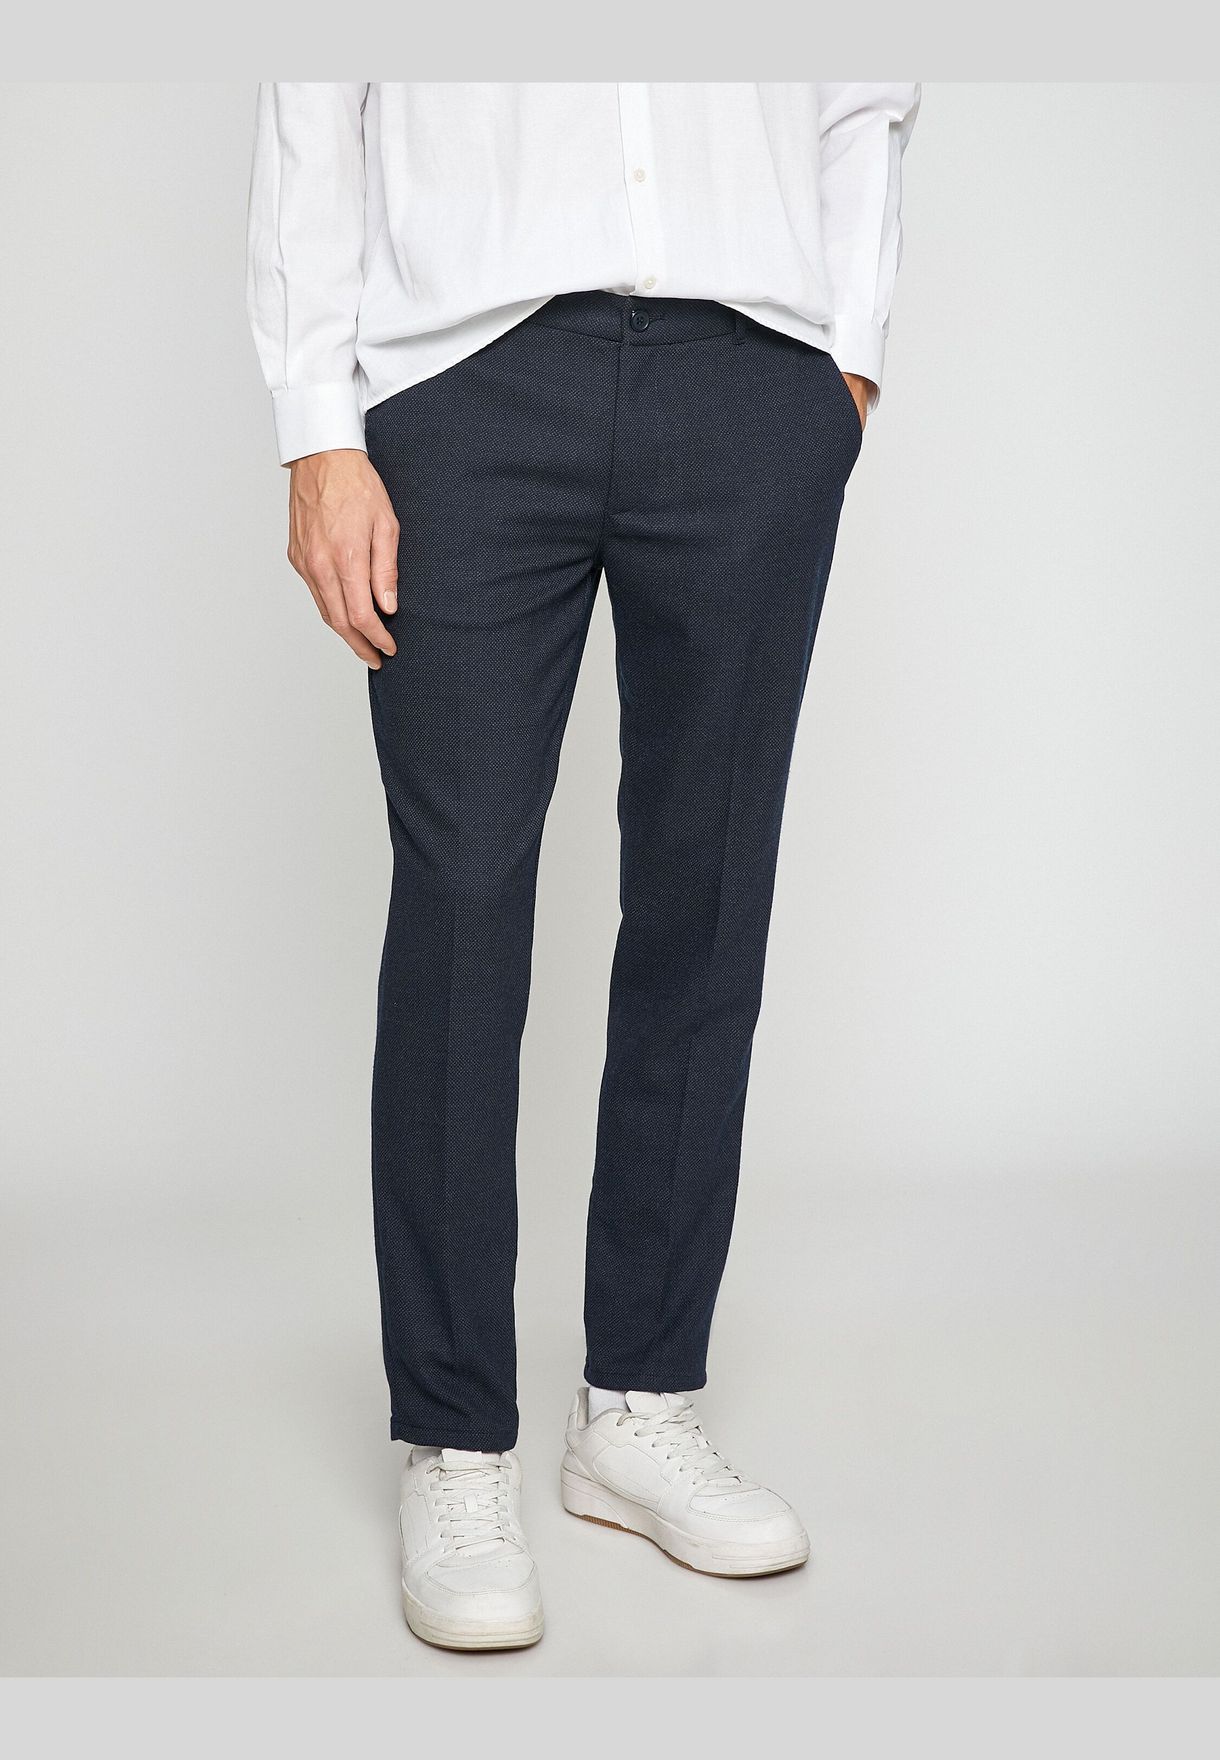 Basic Woven Trousers Pocket Detailed Buttoned Pleated